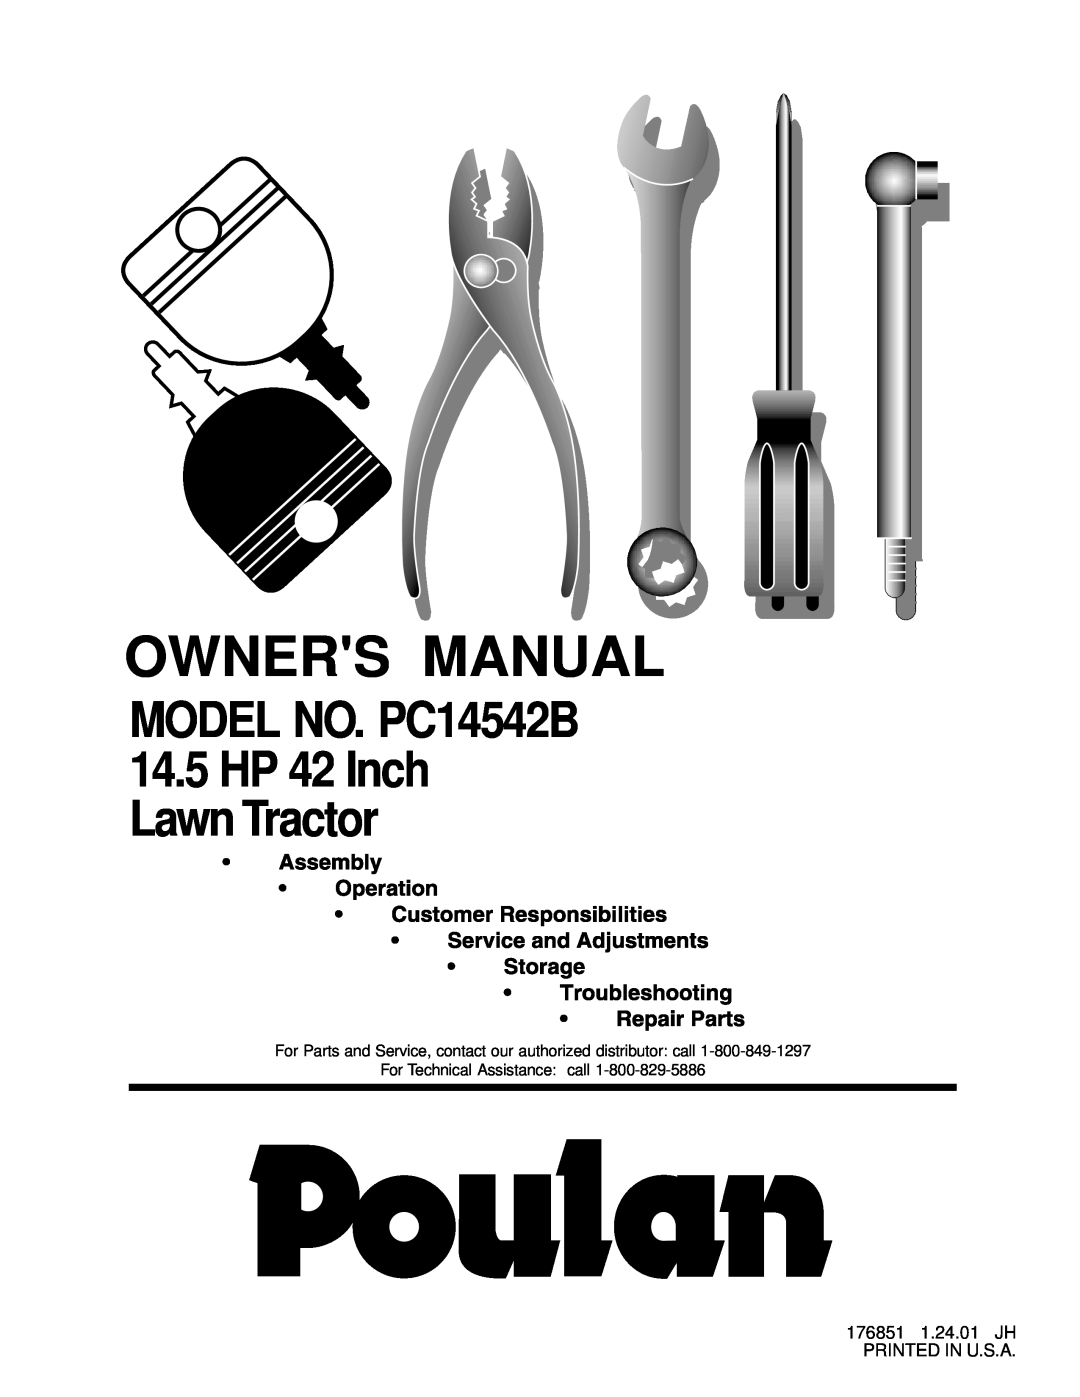 Poulan 176851 owner manual MODEL NO. PC14542B 14.5 HP 42 Inch Lawn Tractor 